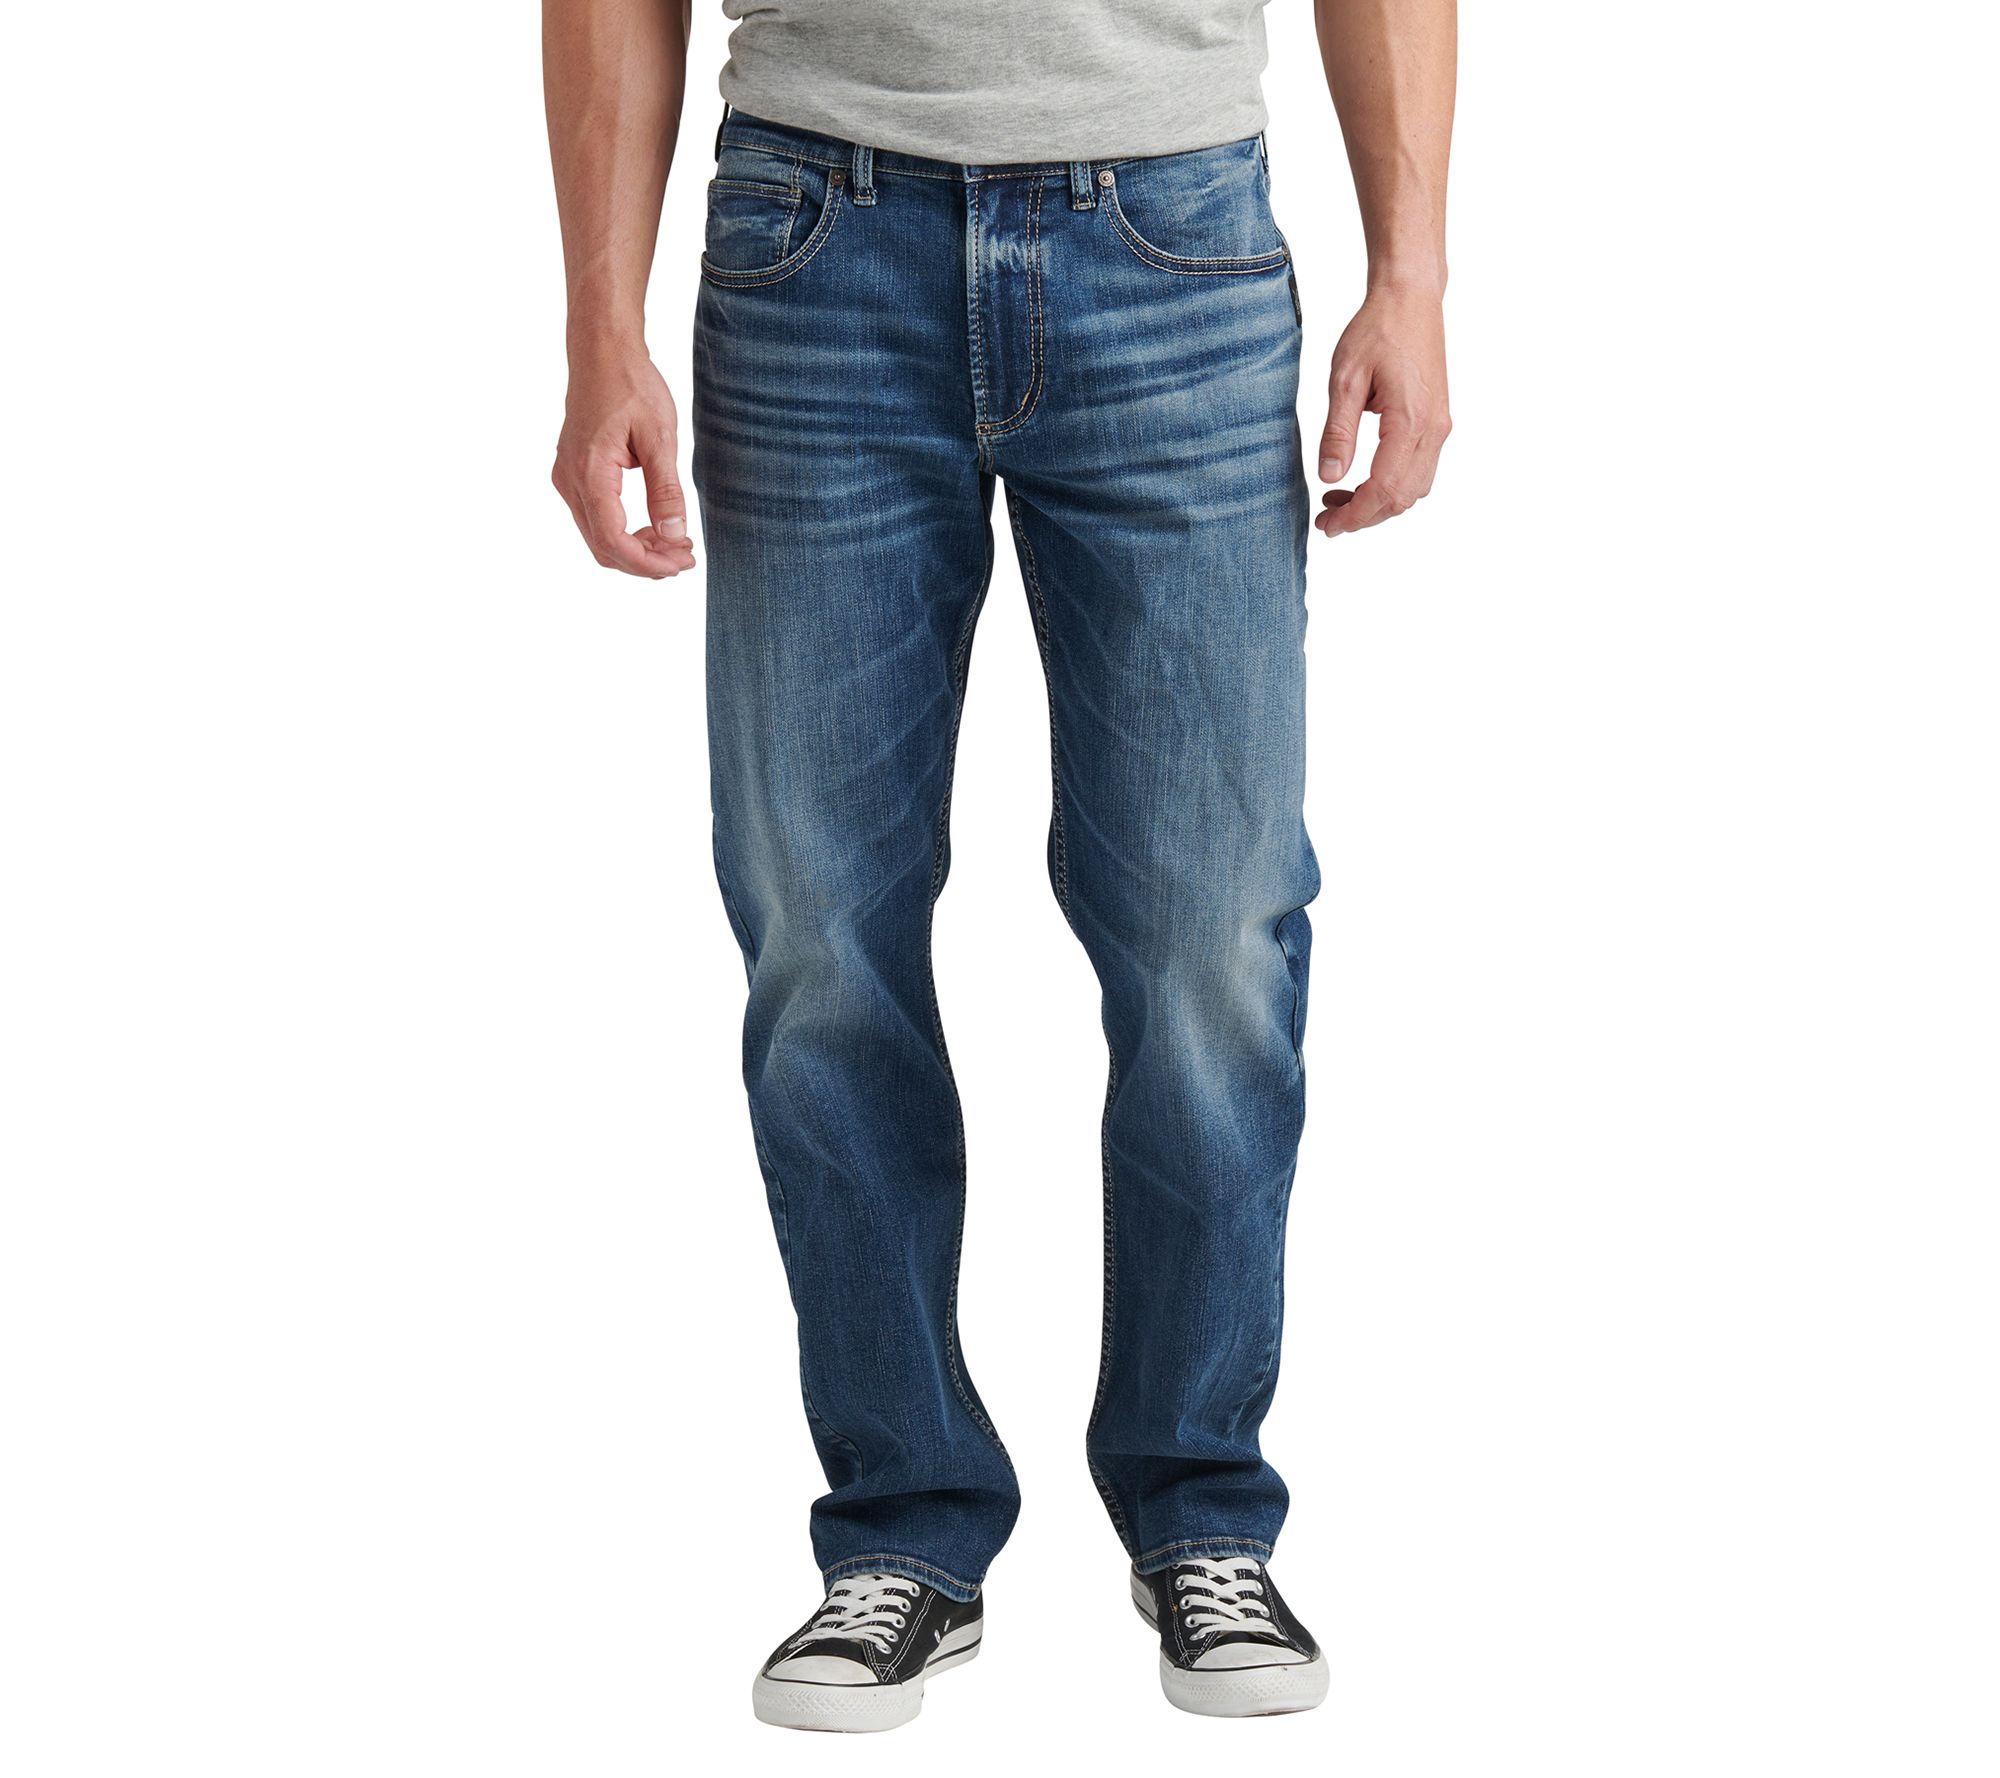 Silver Jeans Co. Eddie Relaxed Fit Tapered Leg Jeans-EKC326 - QVC.com